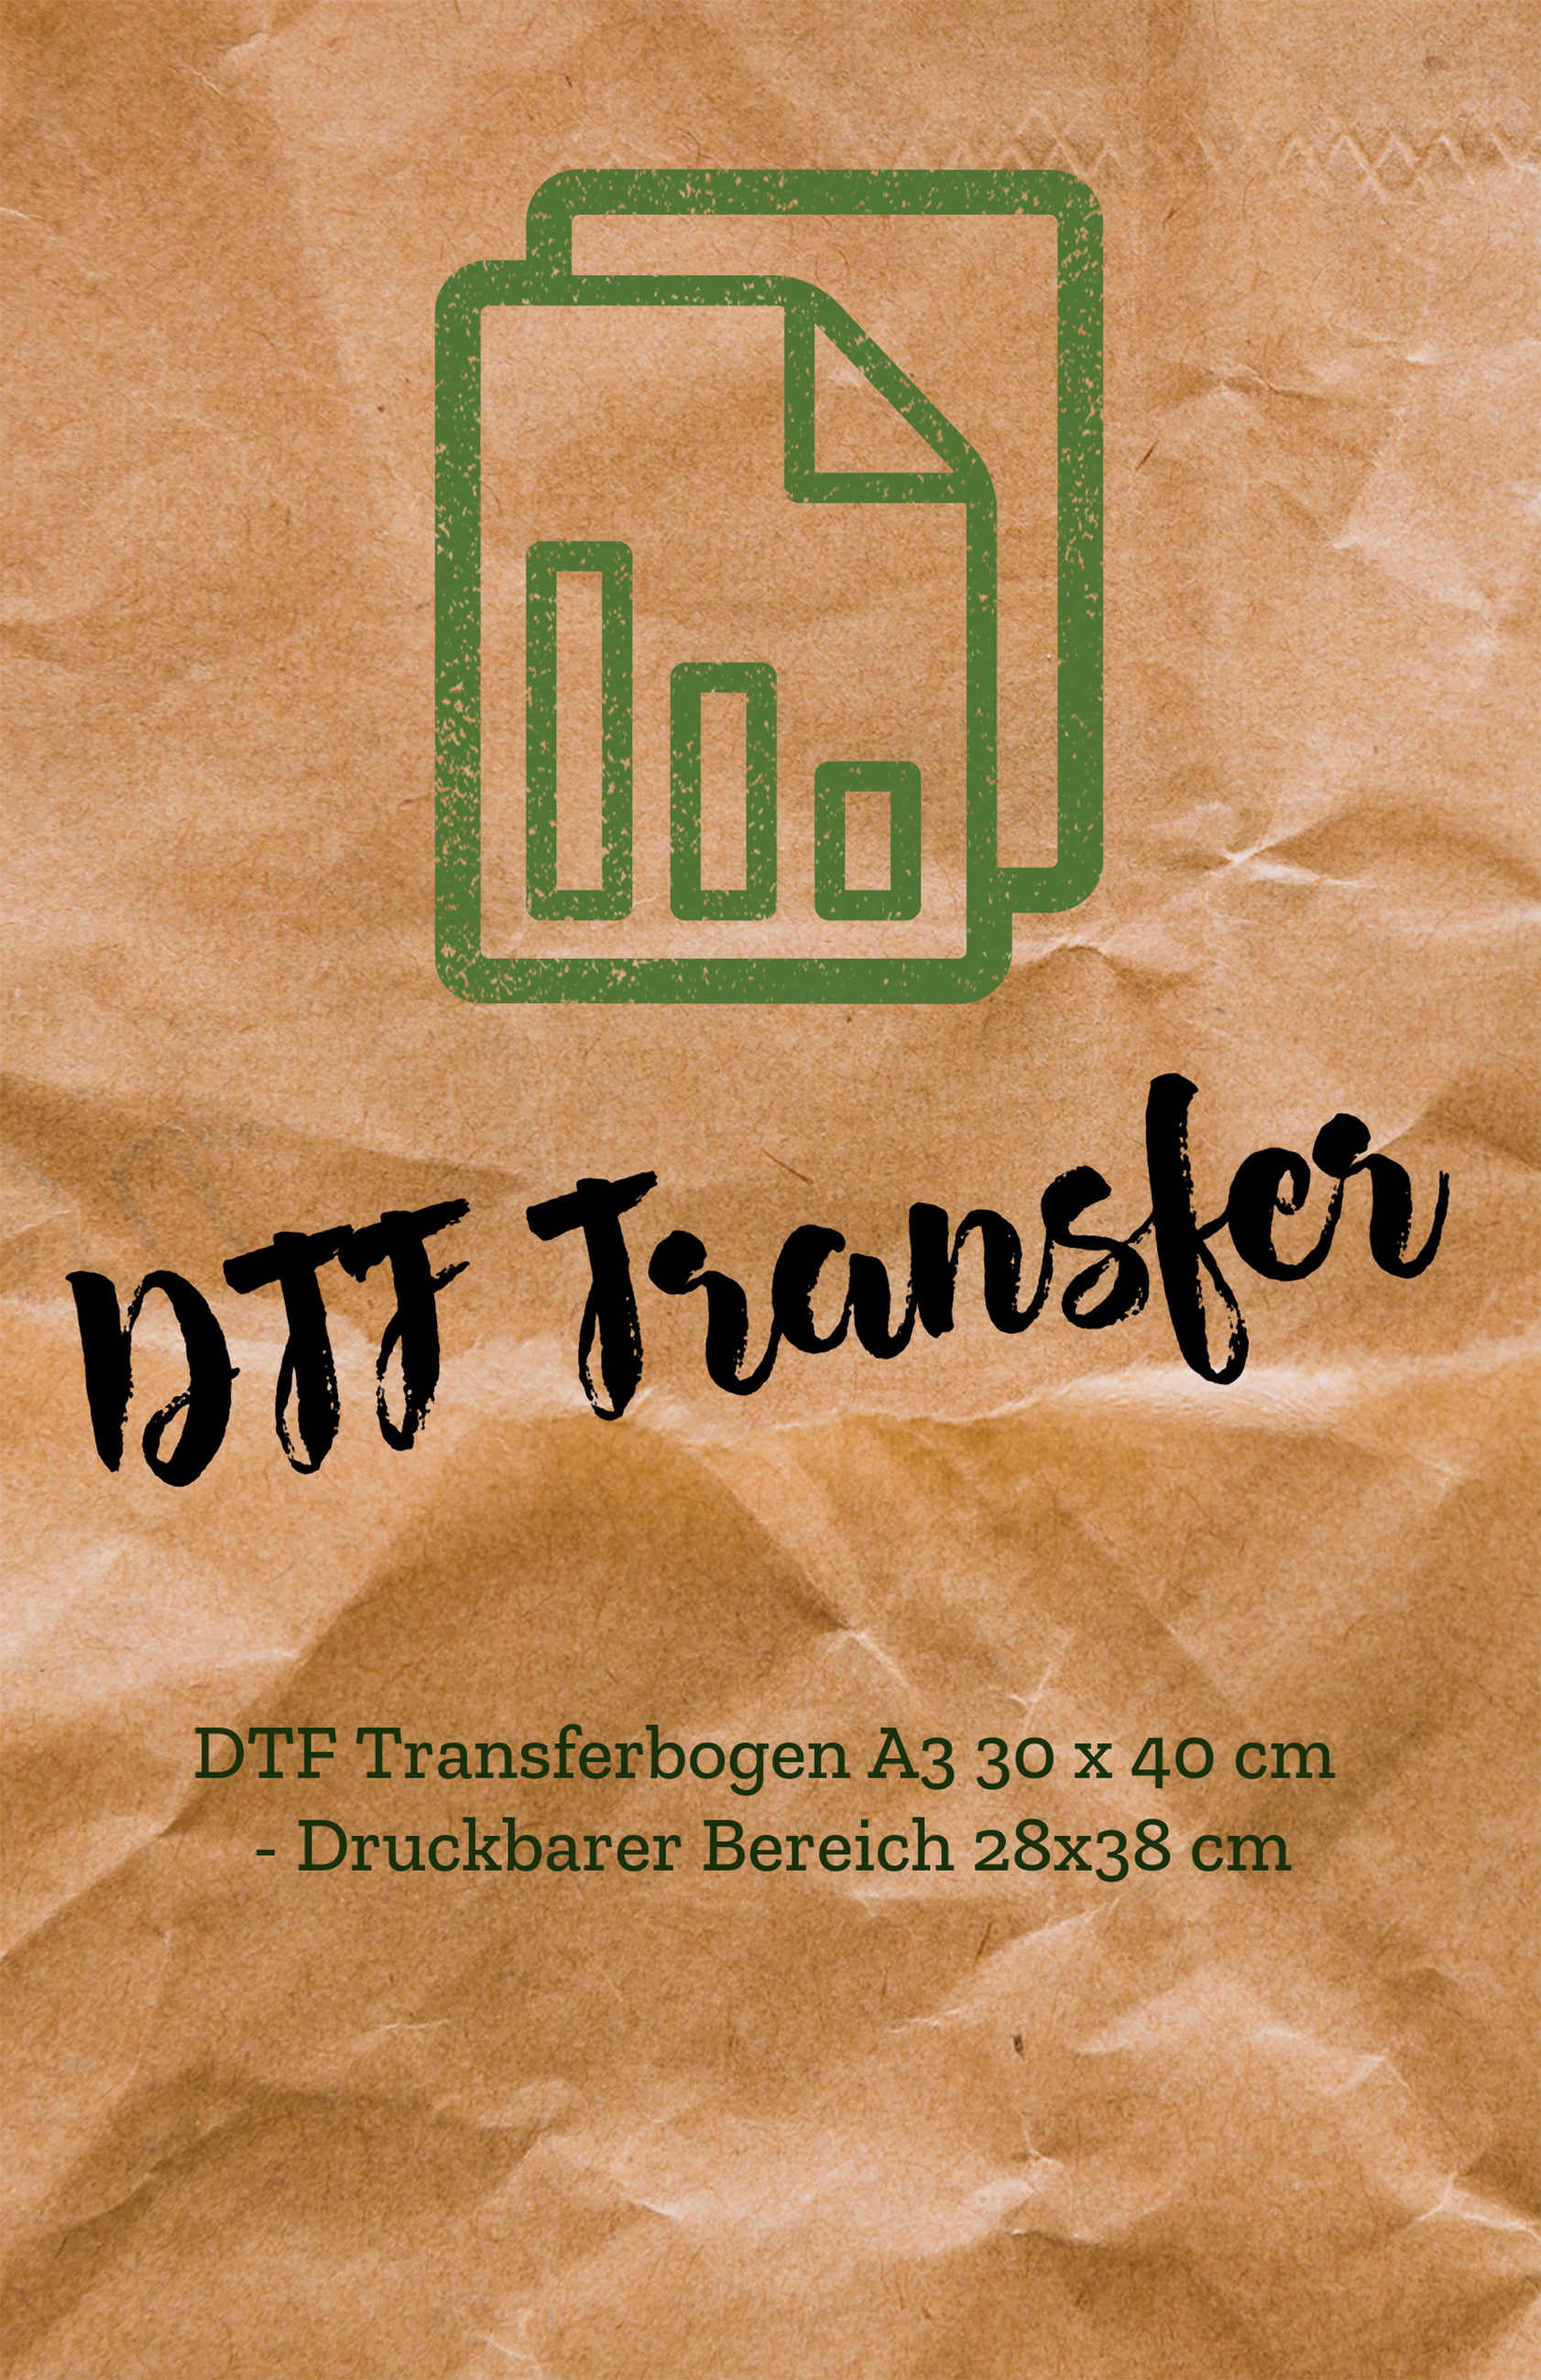 DTF (Direct to Foil) Transfer Format A3 | Druckbereich 28 x 38 cm 